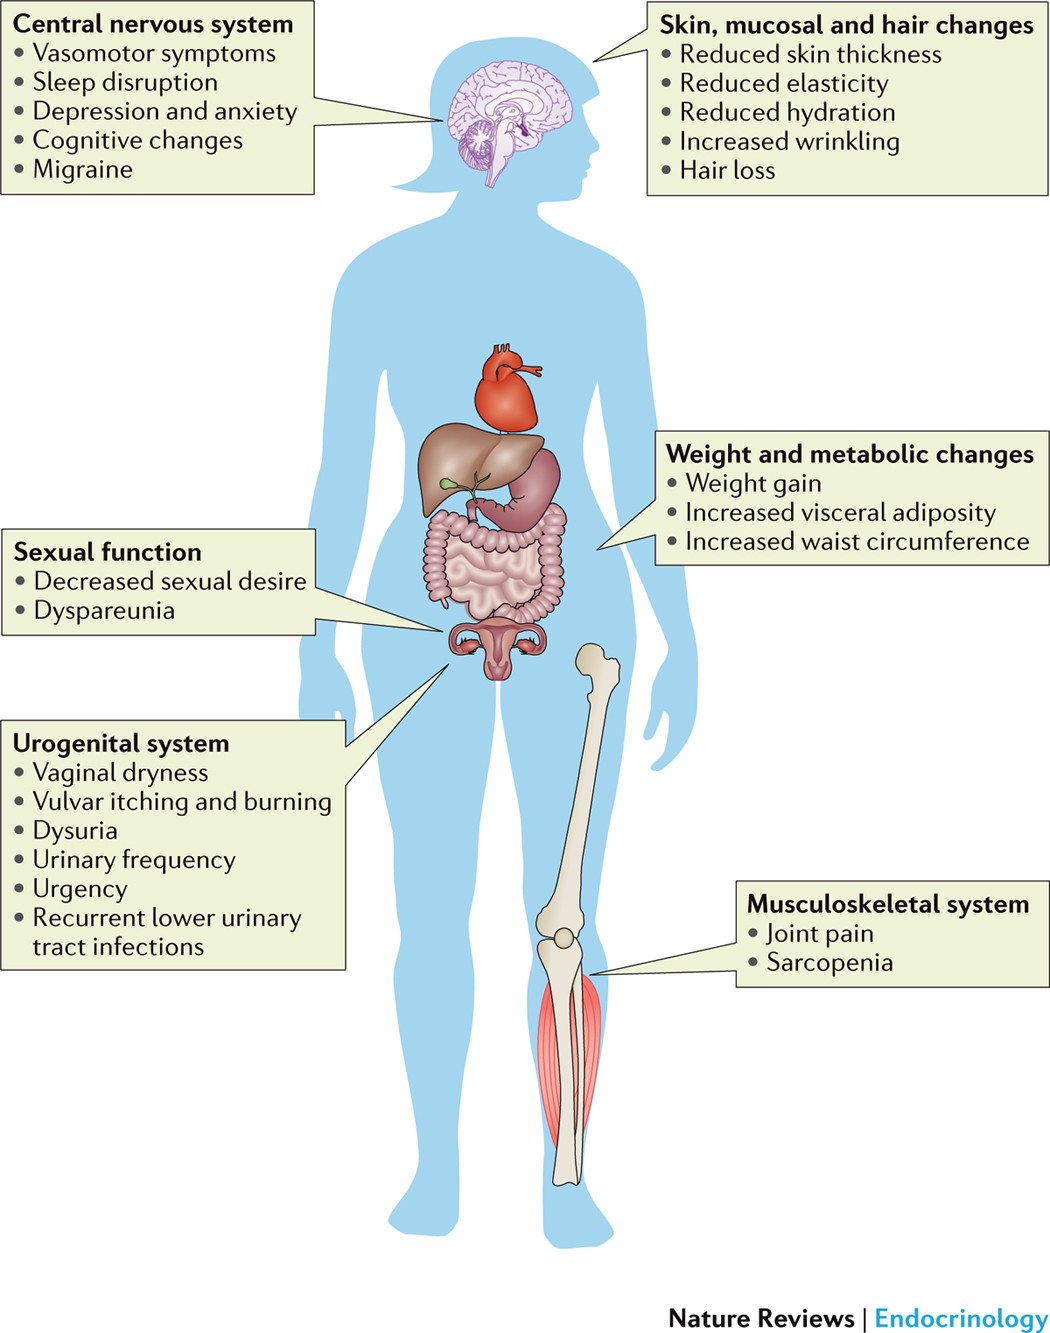 Symptoms of menopause — global prevalence, physiology and implications |  Nature Reviews Endocrinology